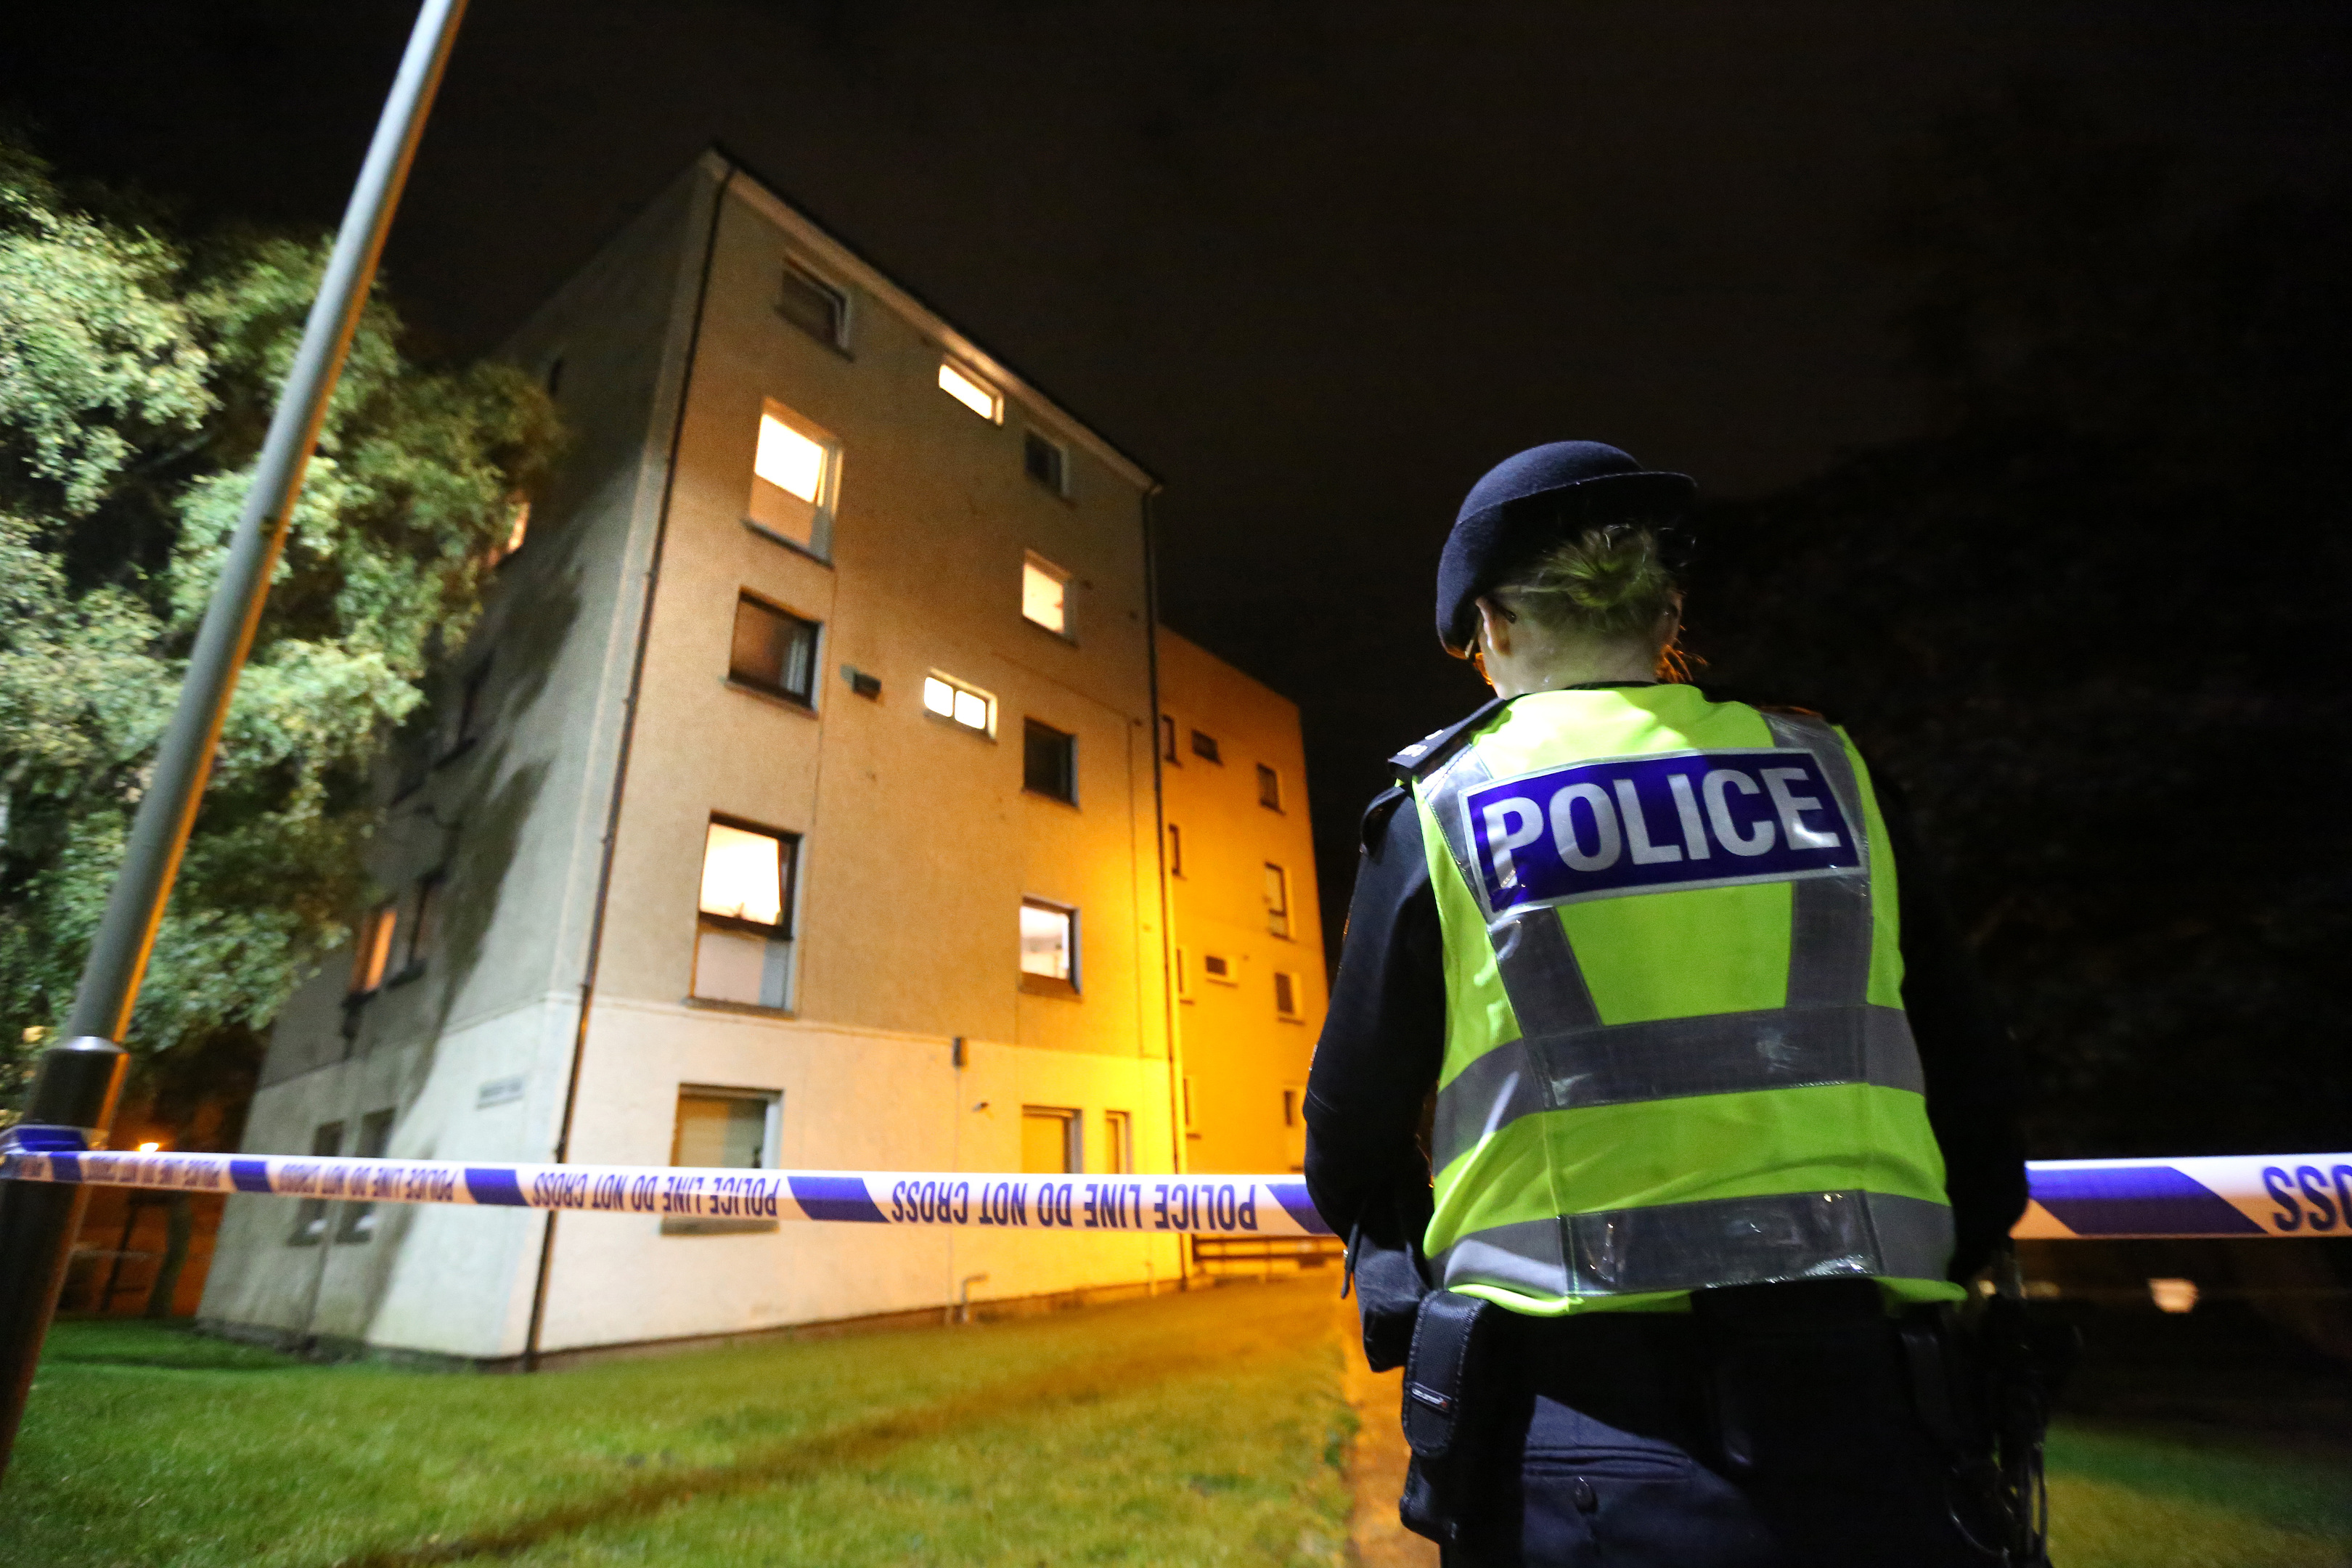 Police outside the flat in Nursery Road on the night of the incident.